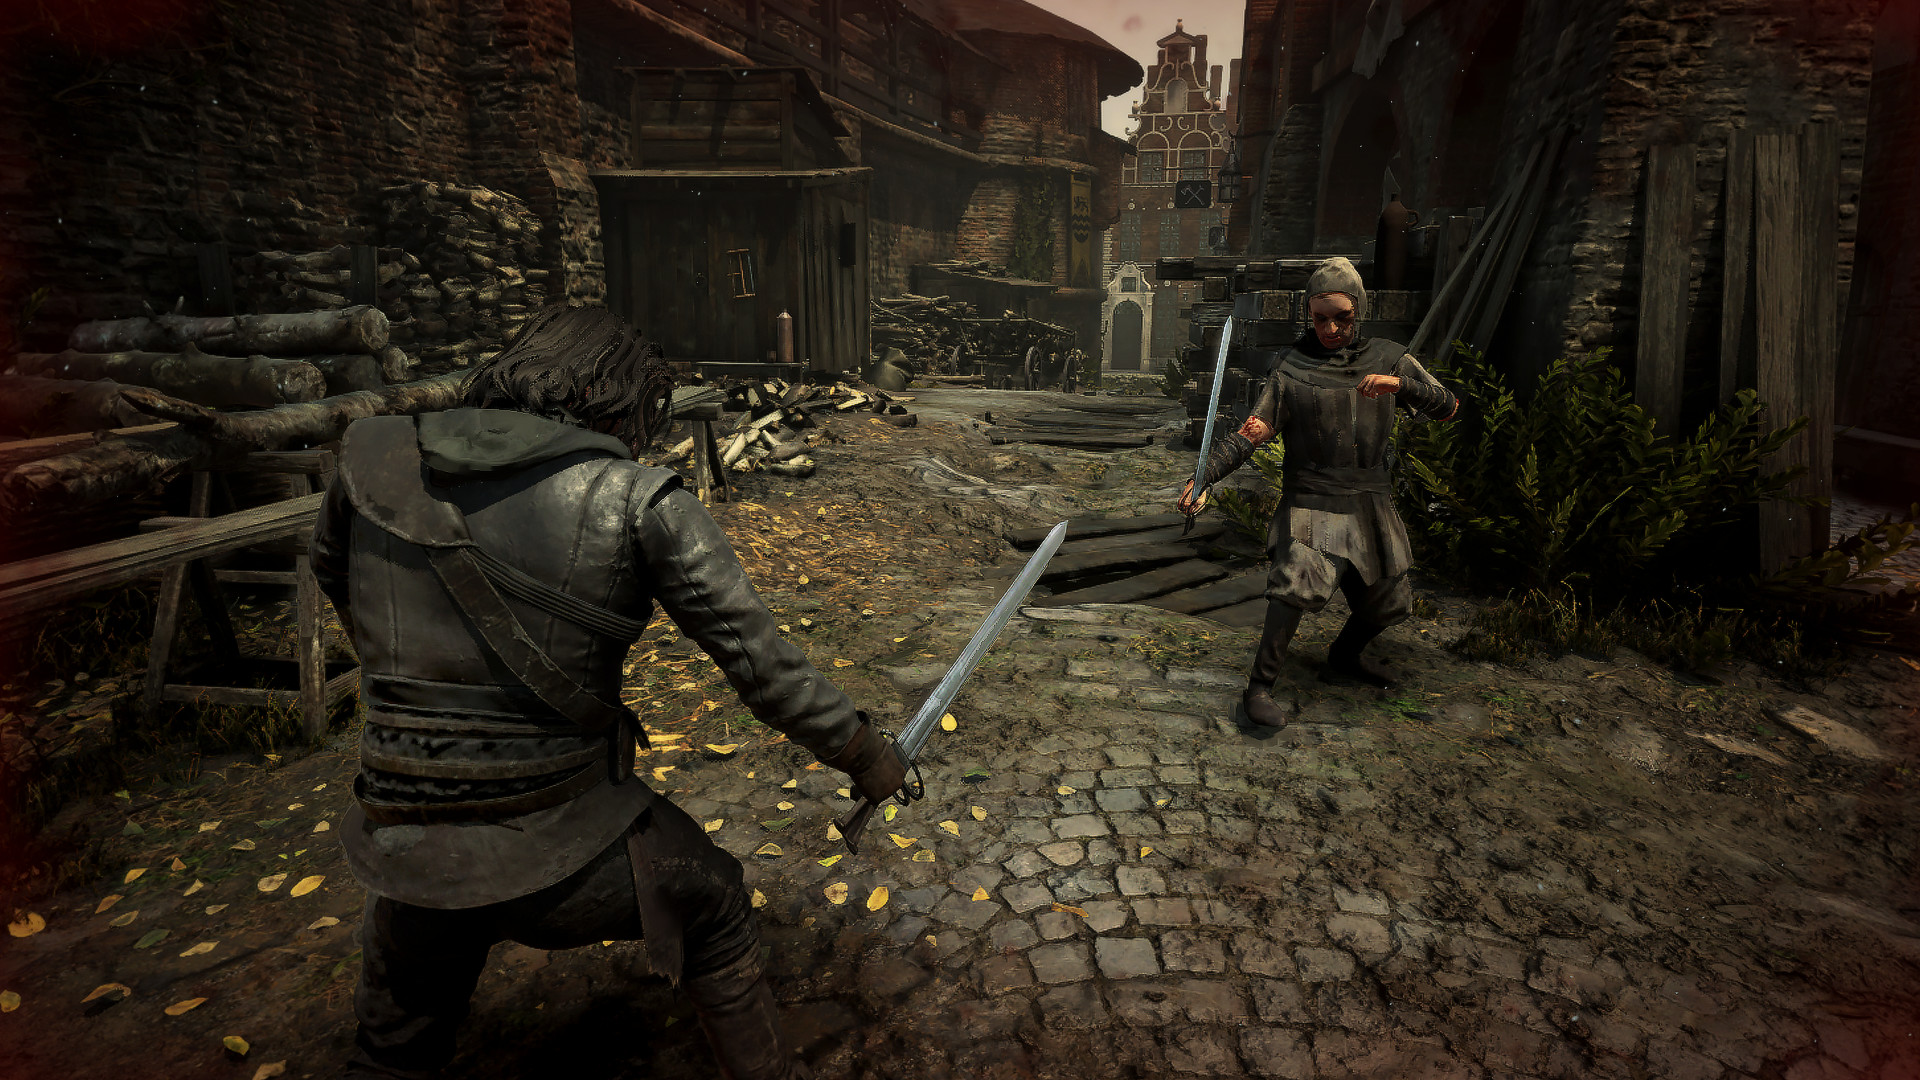 Inquisitor squares off with opponent on cobblestone streets, sword raised